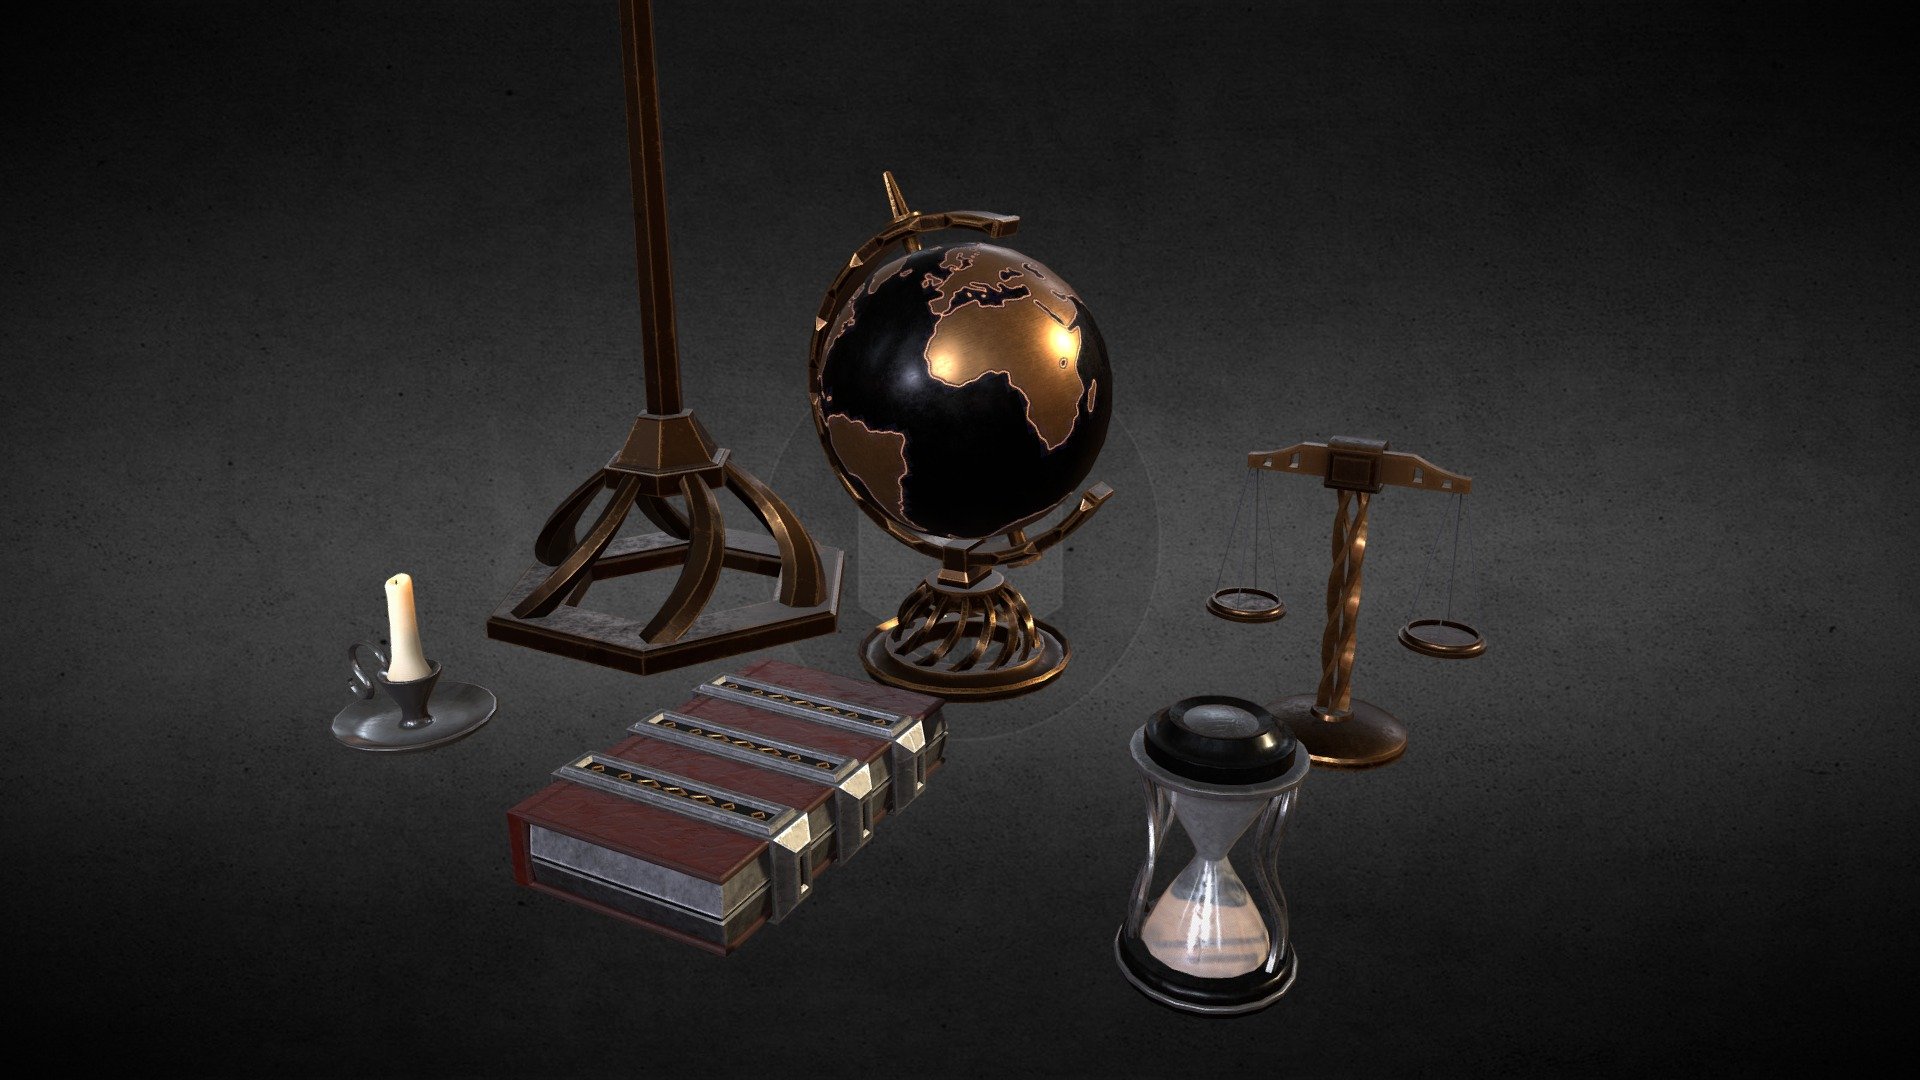 Here is my project for the 6 props assignment in SGD 214. For this project I chose a to do a medieval fantasy study room theme. The props I chose are a candlestand, globe, scale, candle holder, locked book, and a hourglass. My inspiration for these props came from an old intrest in strange tabletop items like globes, hourglasses, and scales. I remember as a kid staring at maps and fiddling with hourglasses watching the sand dribble down to each side. Finding ideas for this project wasn't too hard, as I already knew mostly what I wanted to make and how 3d model